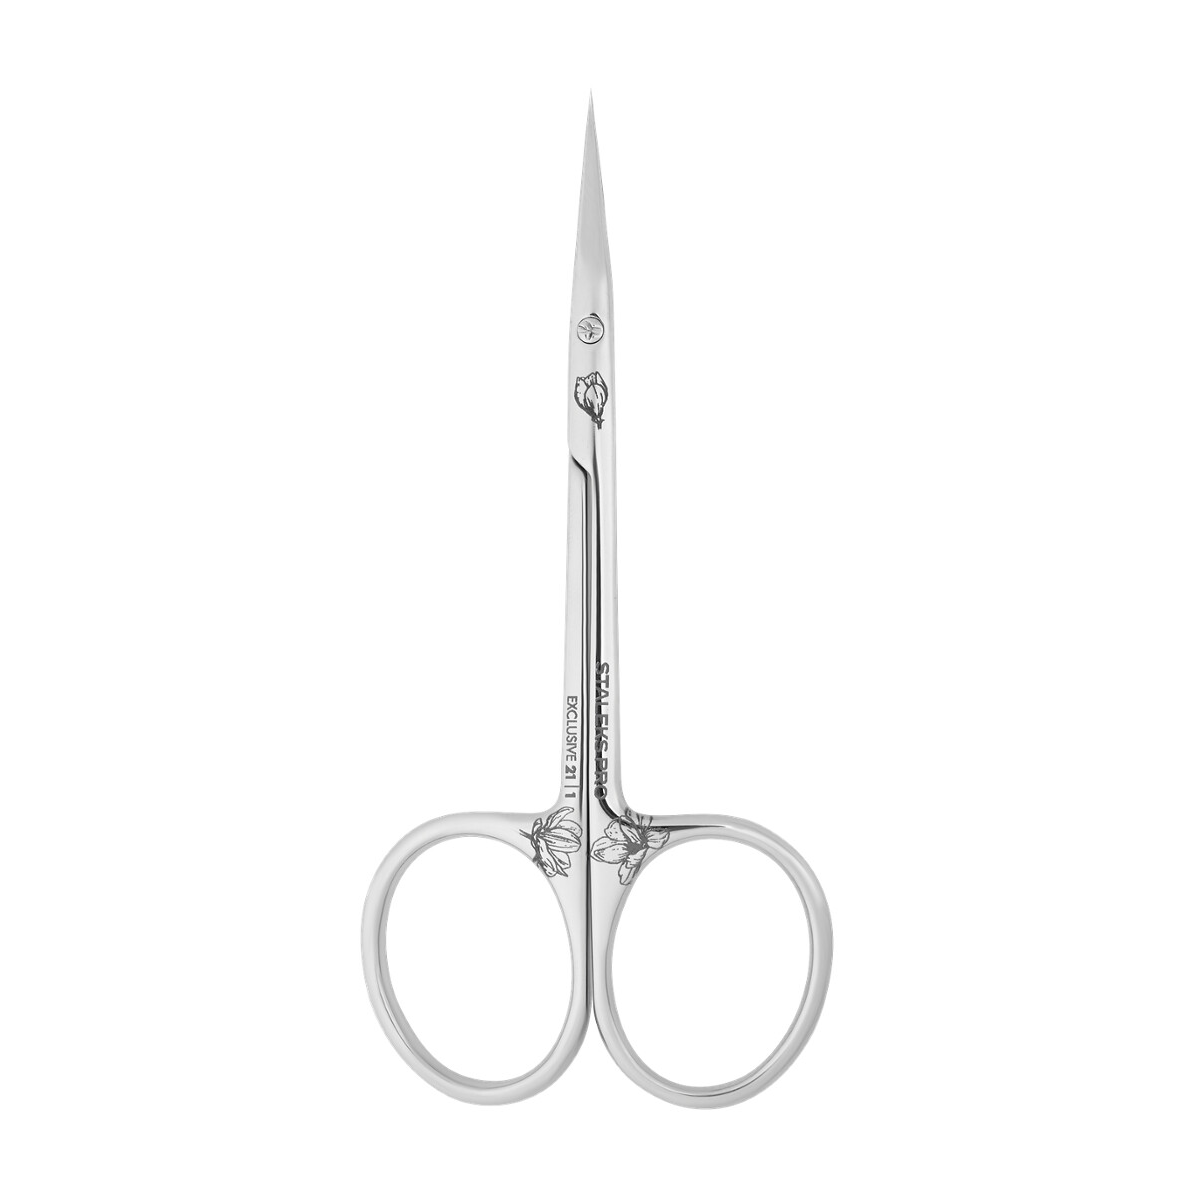    Staleks_Professional_cuticle_scissors_Exc._21_TYPE_1_Magnol._SX-_21_1M product view front